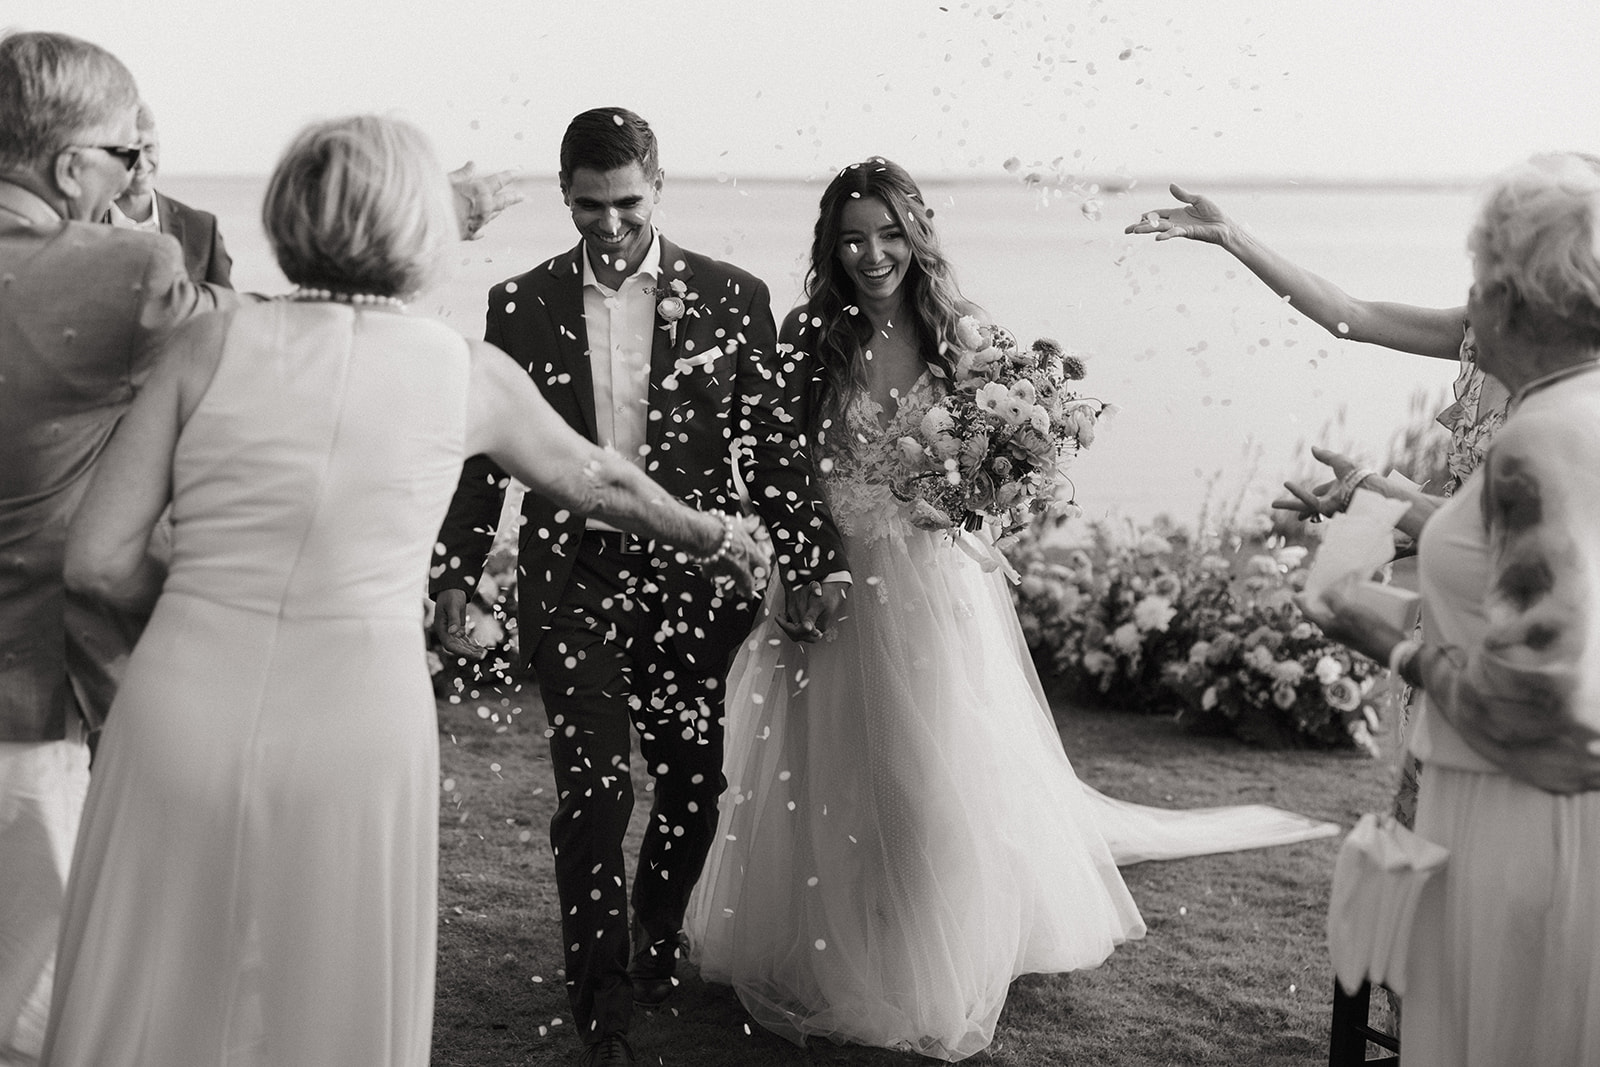 couple exits wedding with flower petals tossed on them